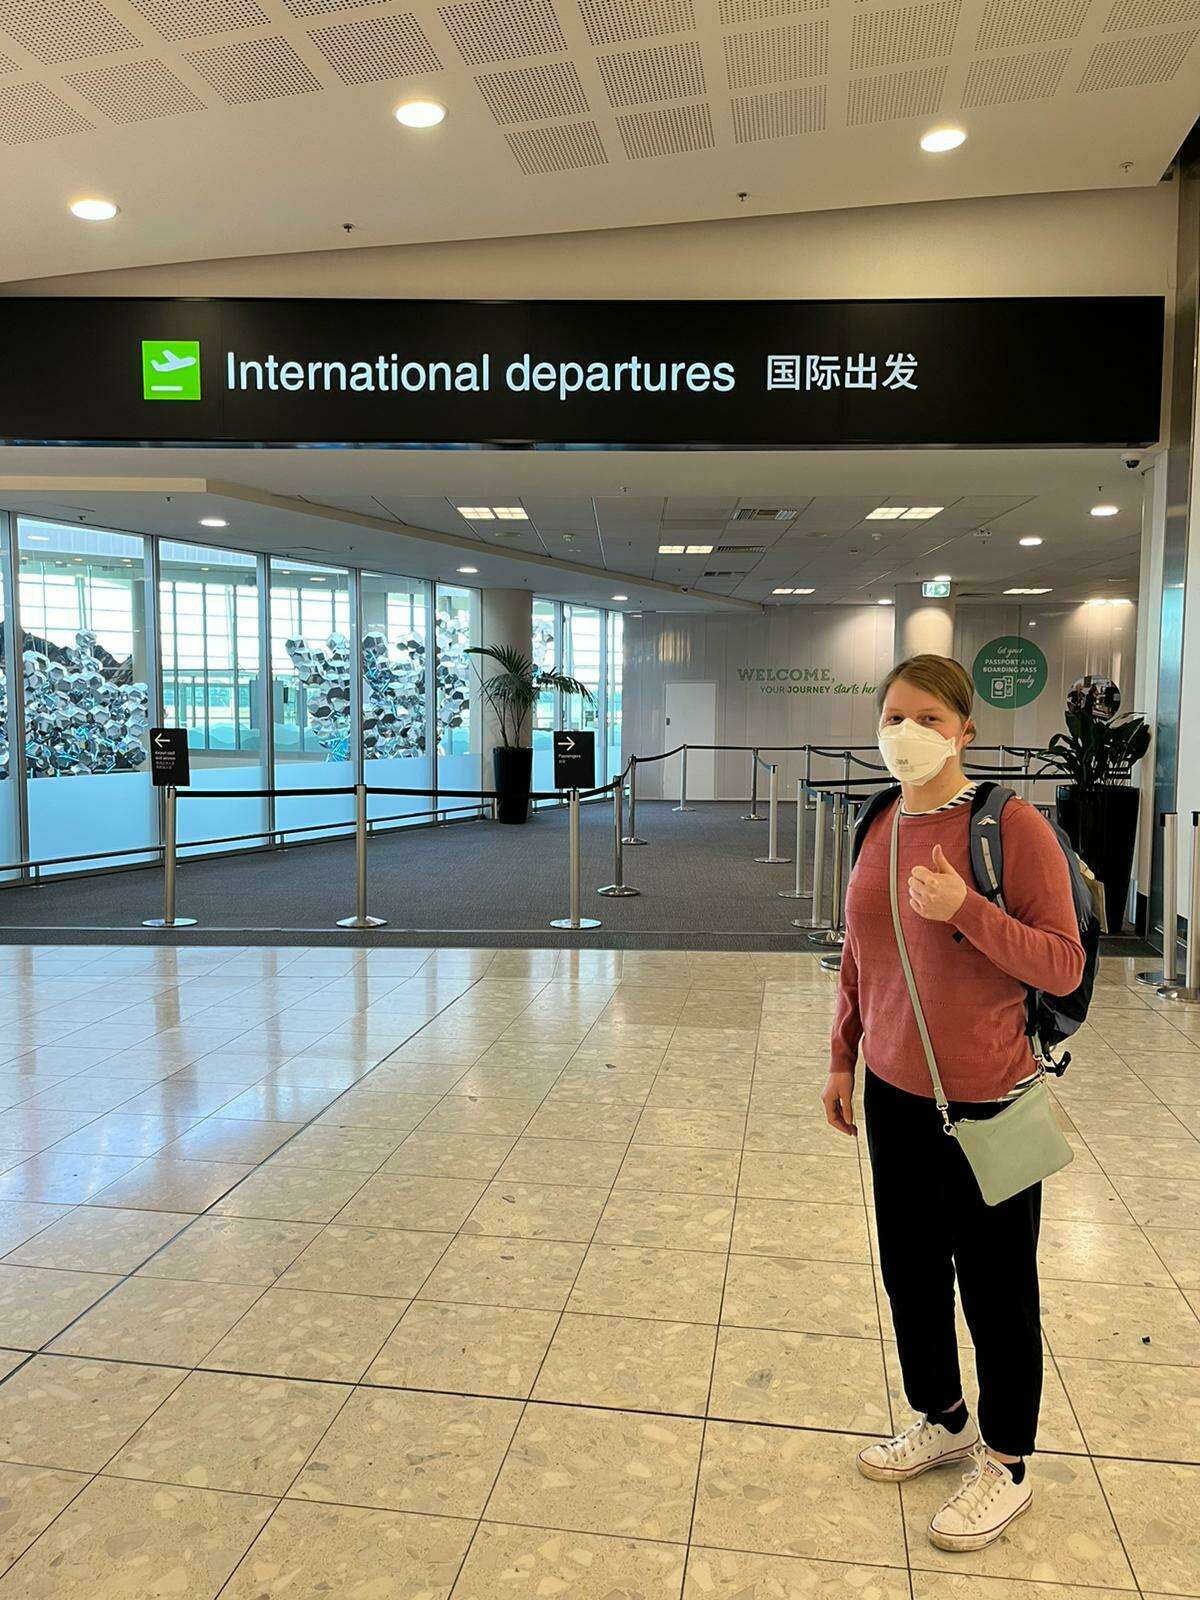 Image shows Victoria standing in an airport under the sign 'International departures'. She is wearing a red top, black pants and sneakers with a mask. Her hair is pulled back and she is carrying a backpack as she looks towards the camera.